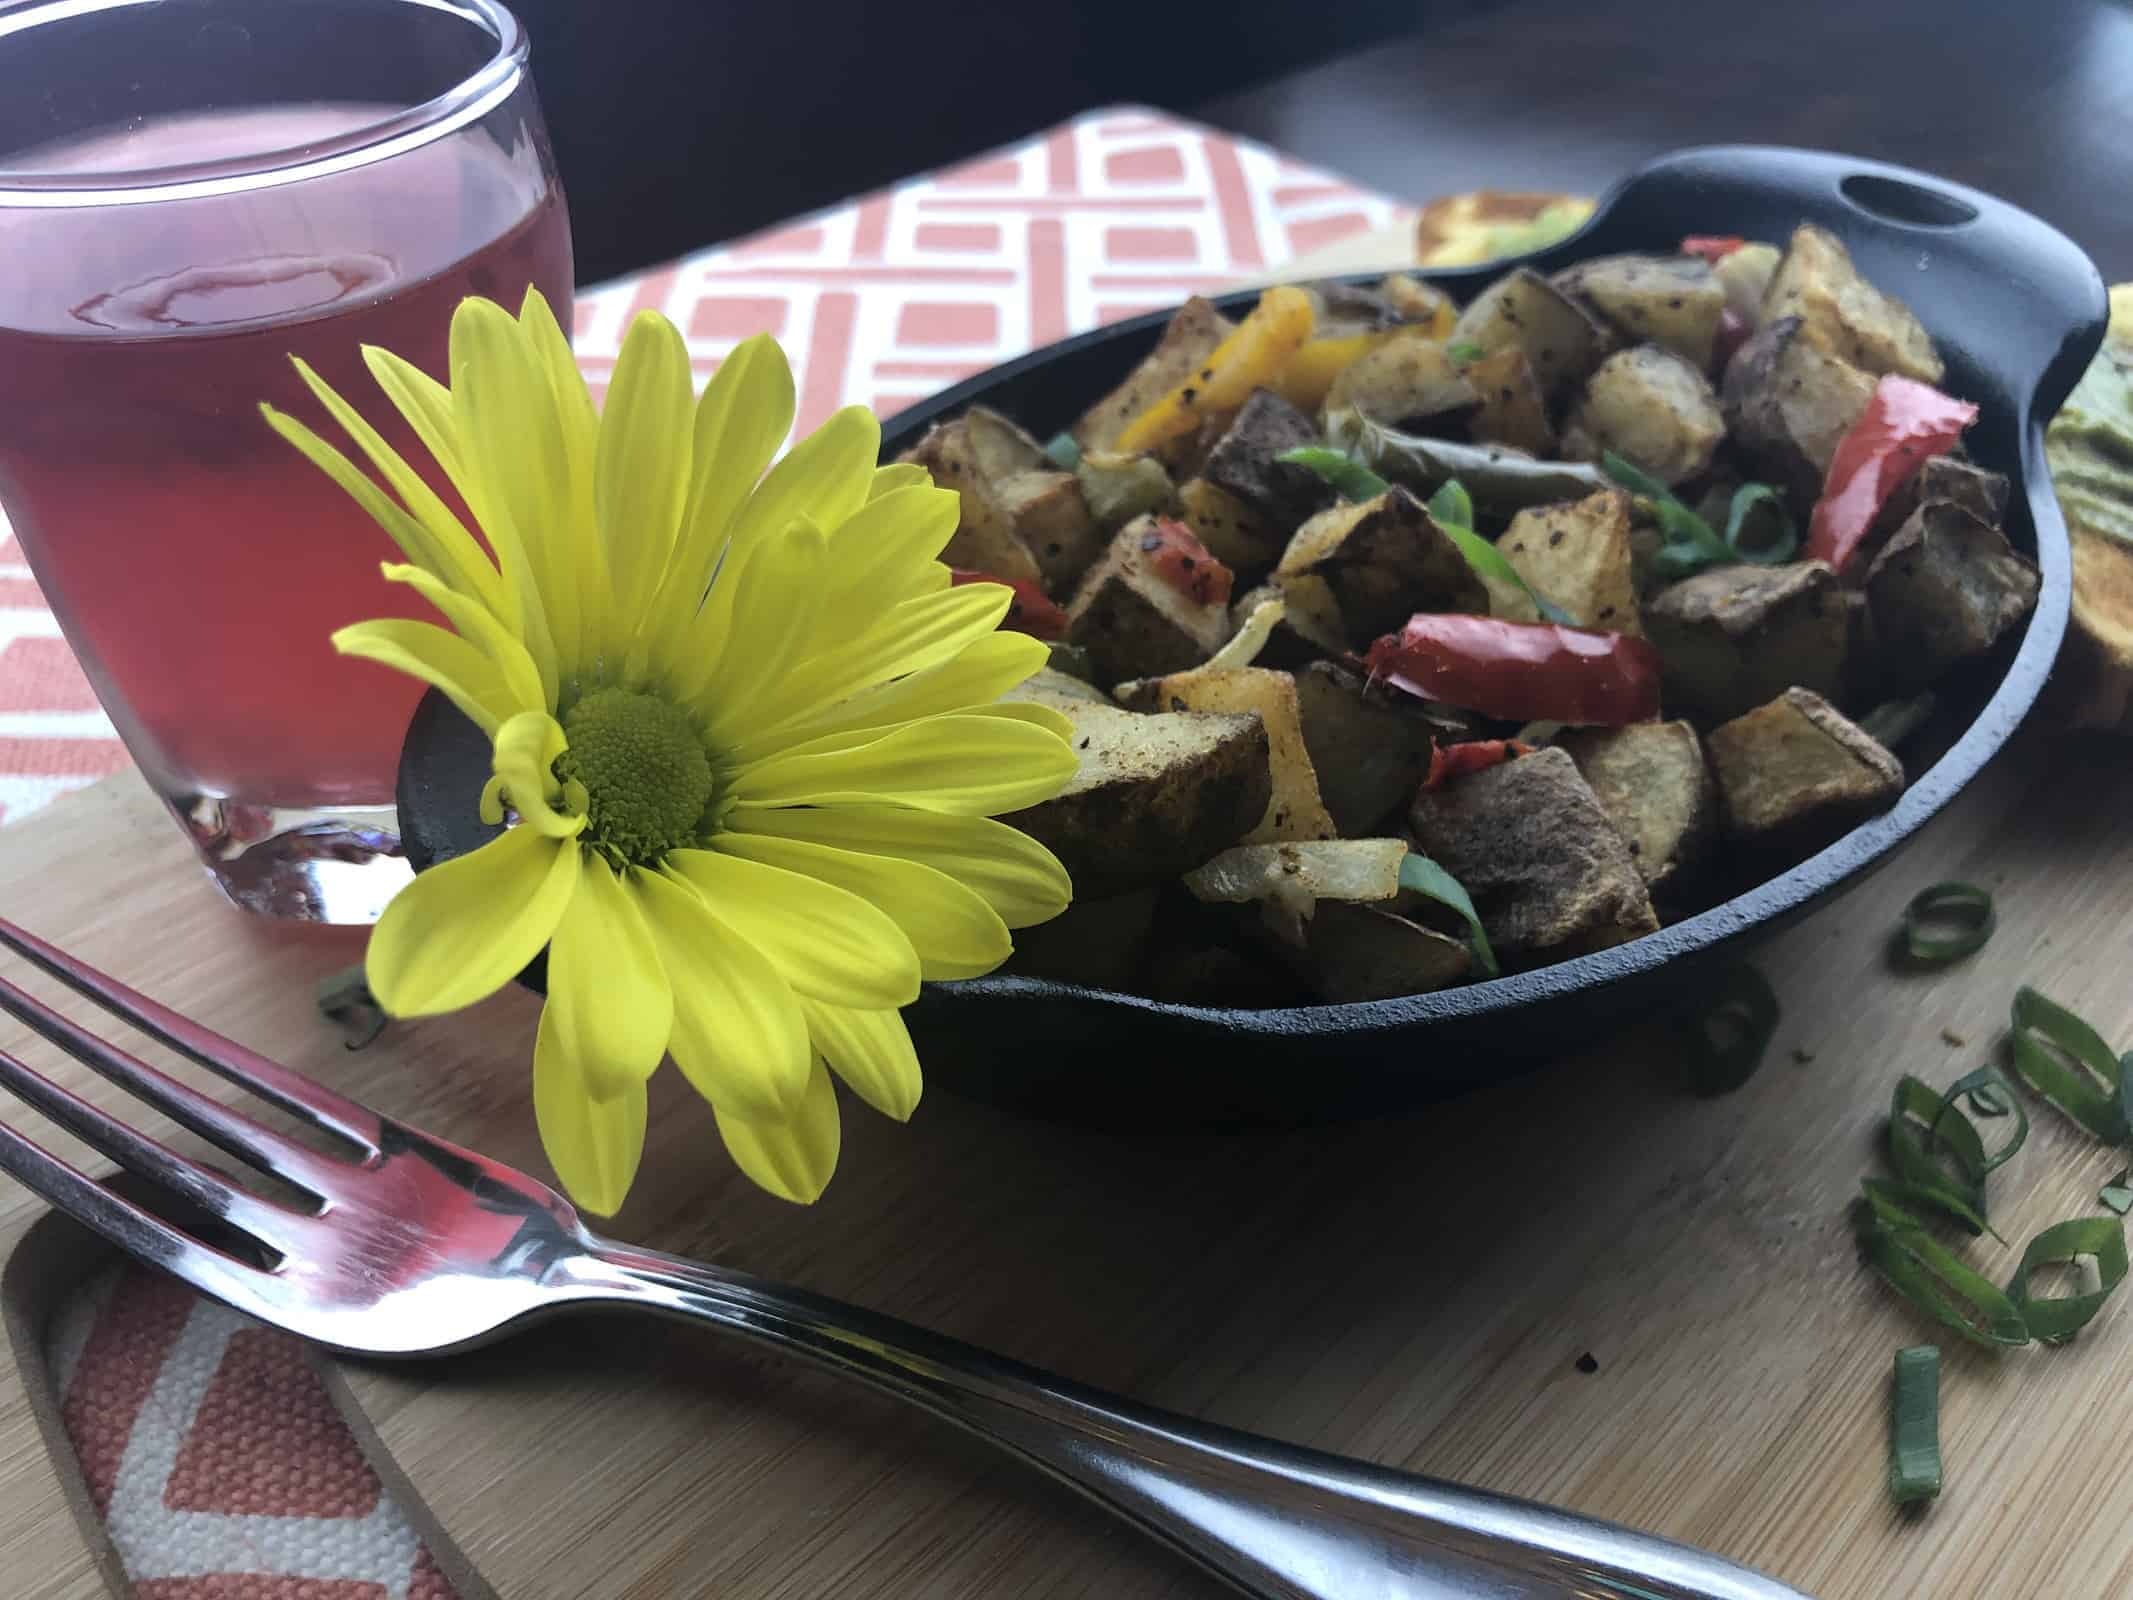 Air Fried Home Fries with peppers in a black casserole dish on a wooden cutting board with a yellow flower and a glass of fruit punch